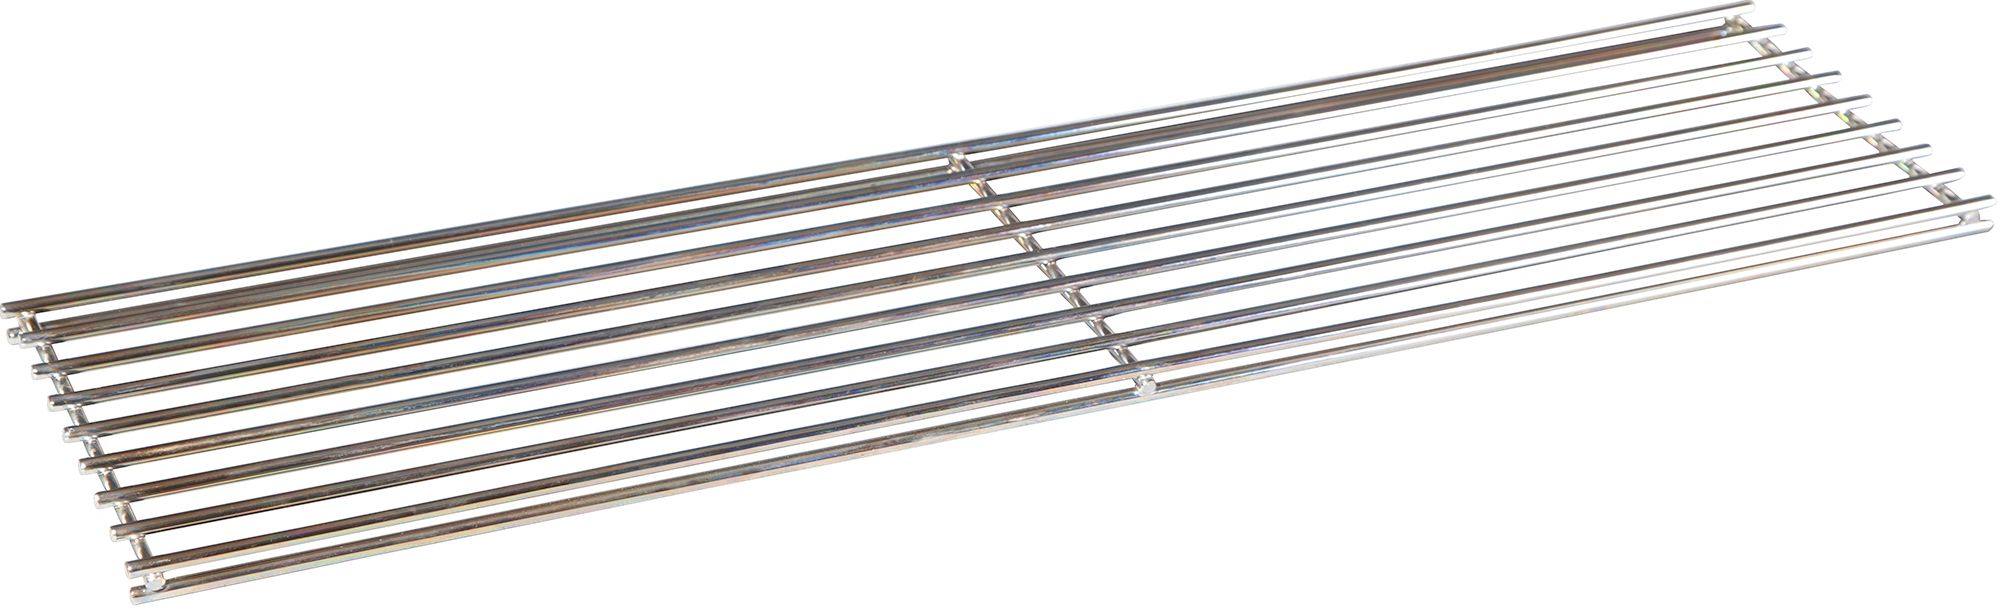 Camp Chef Pellet Grill 24'' Warming Rack